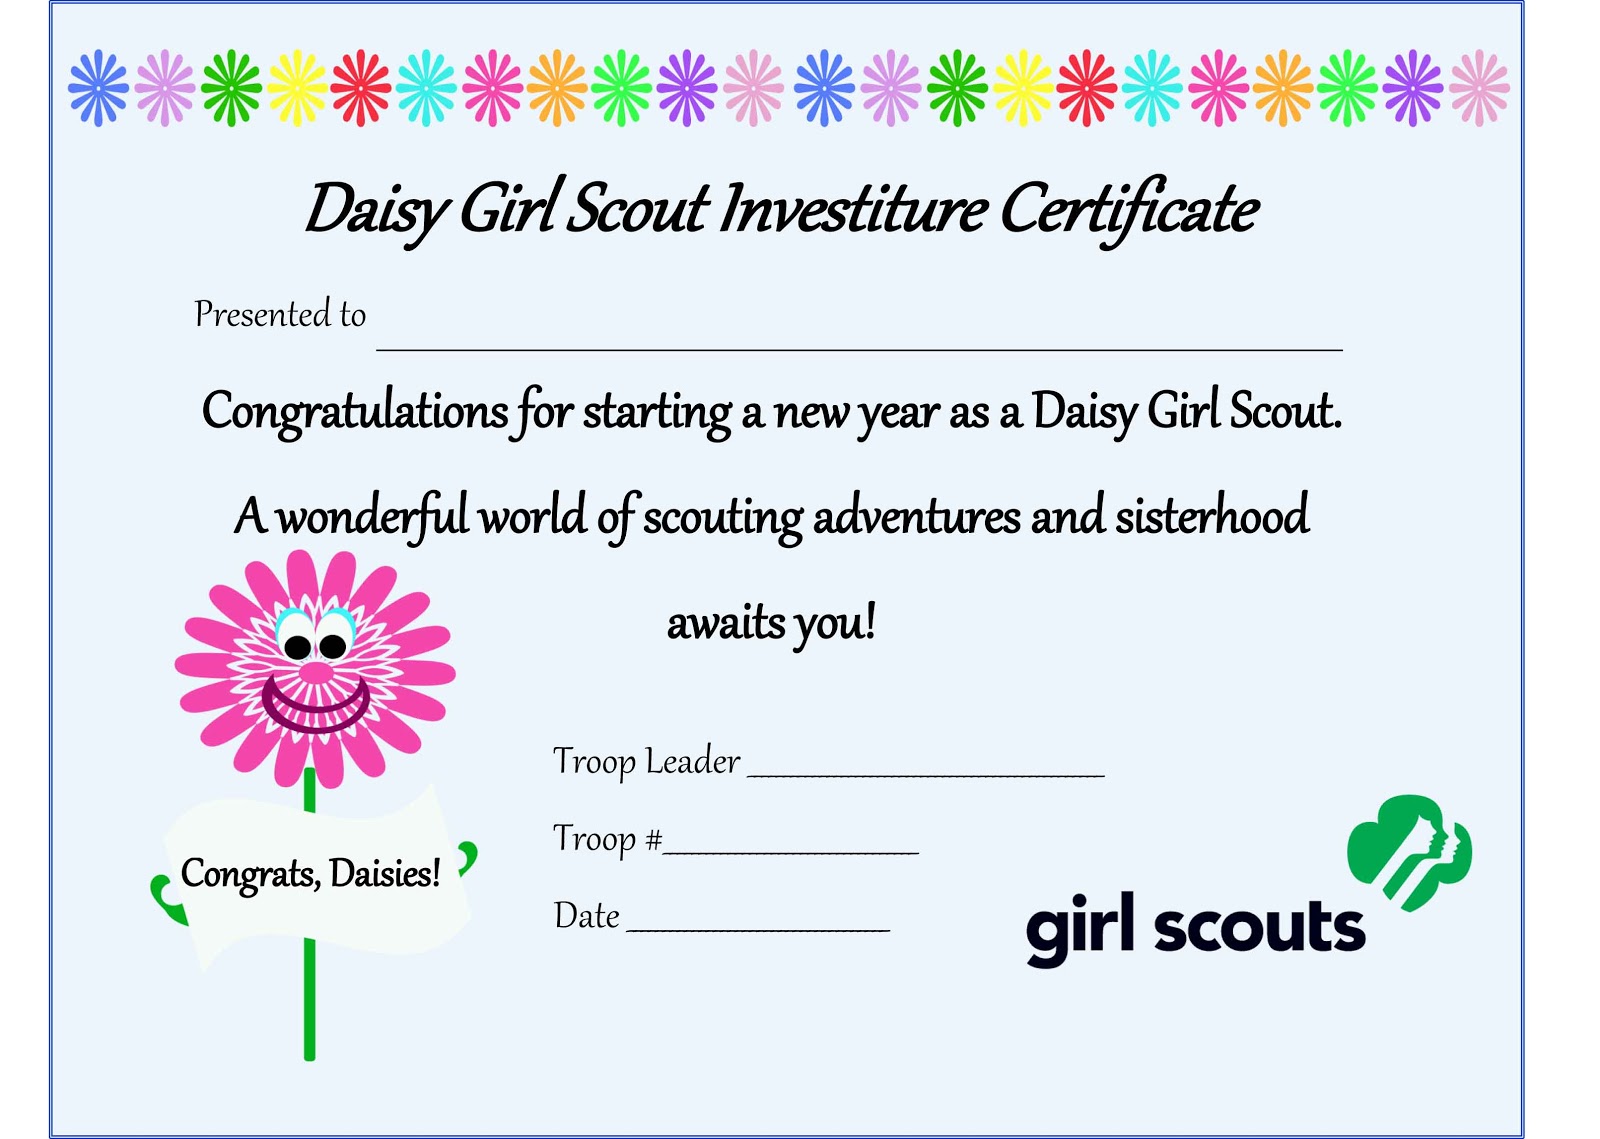 Daisy+Girl+Scout+Investiture+Certificate+2+single